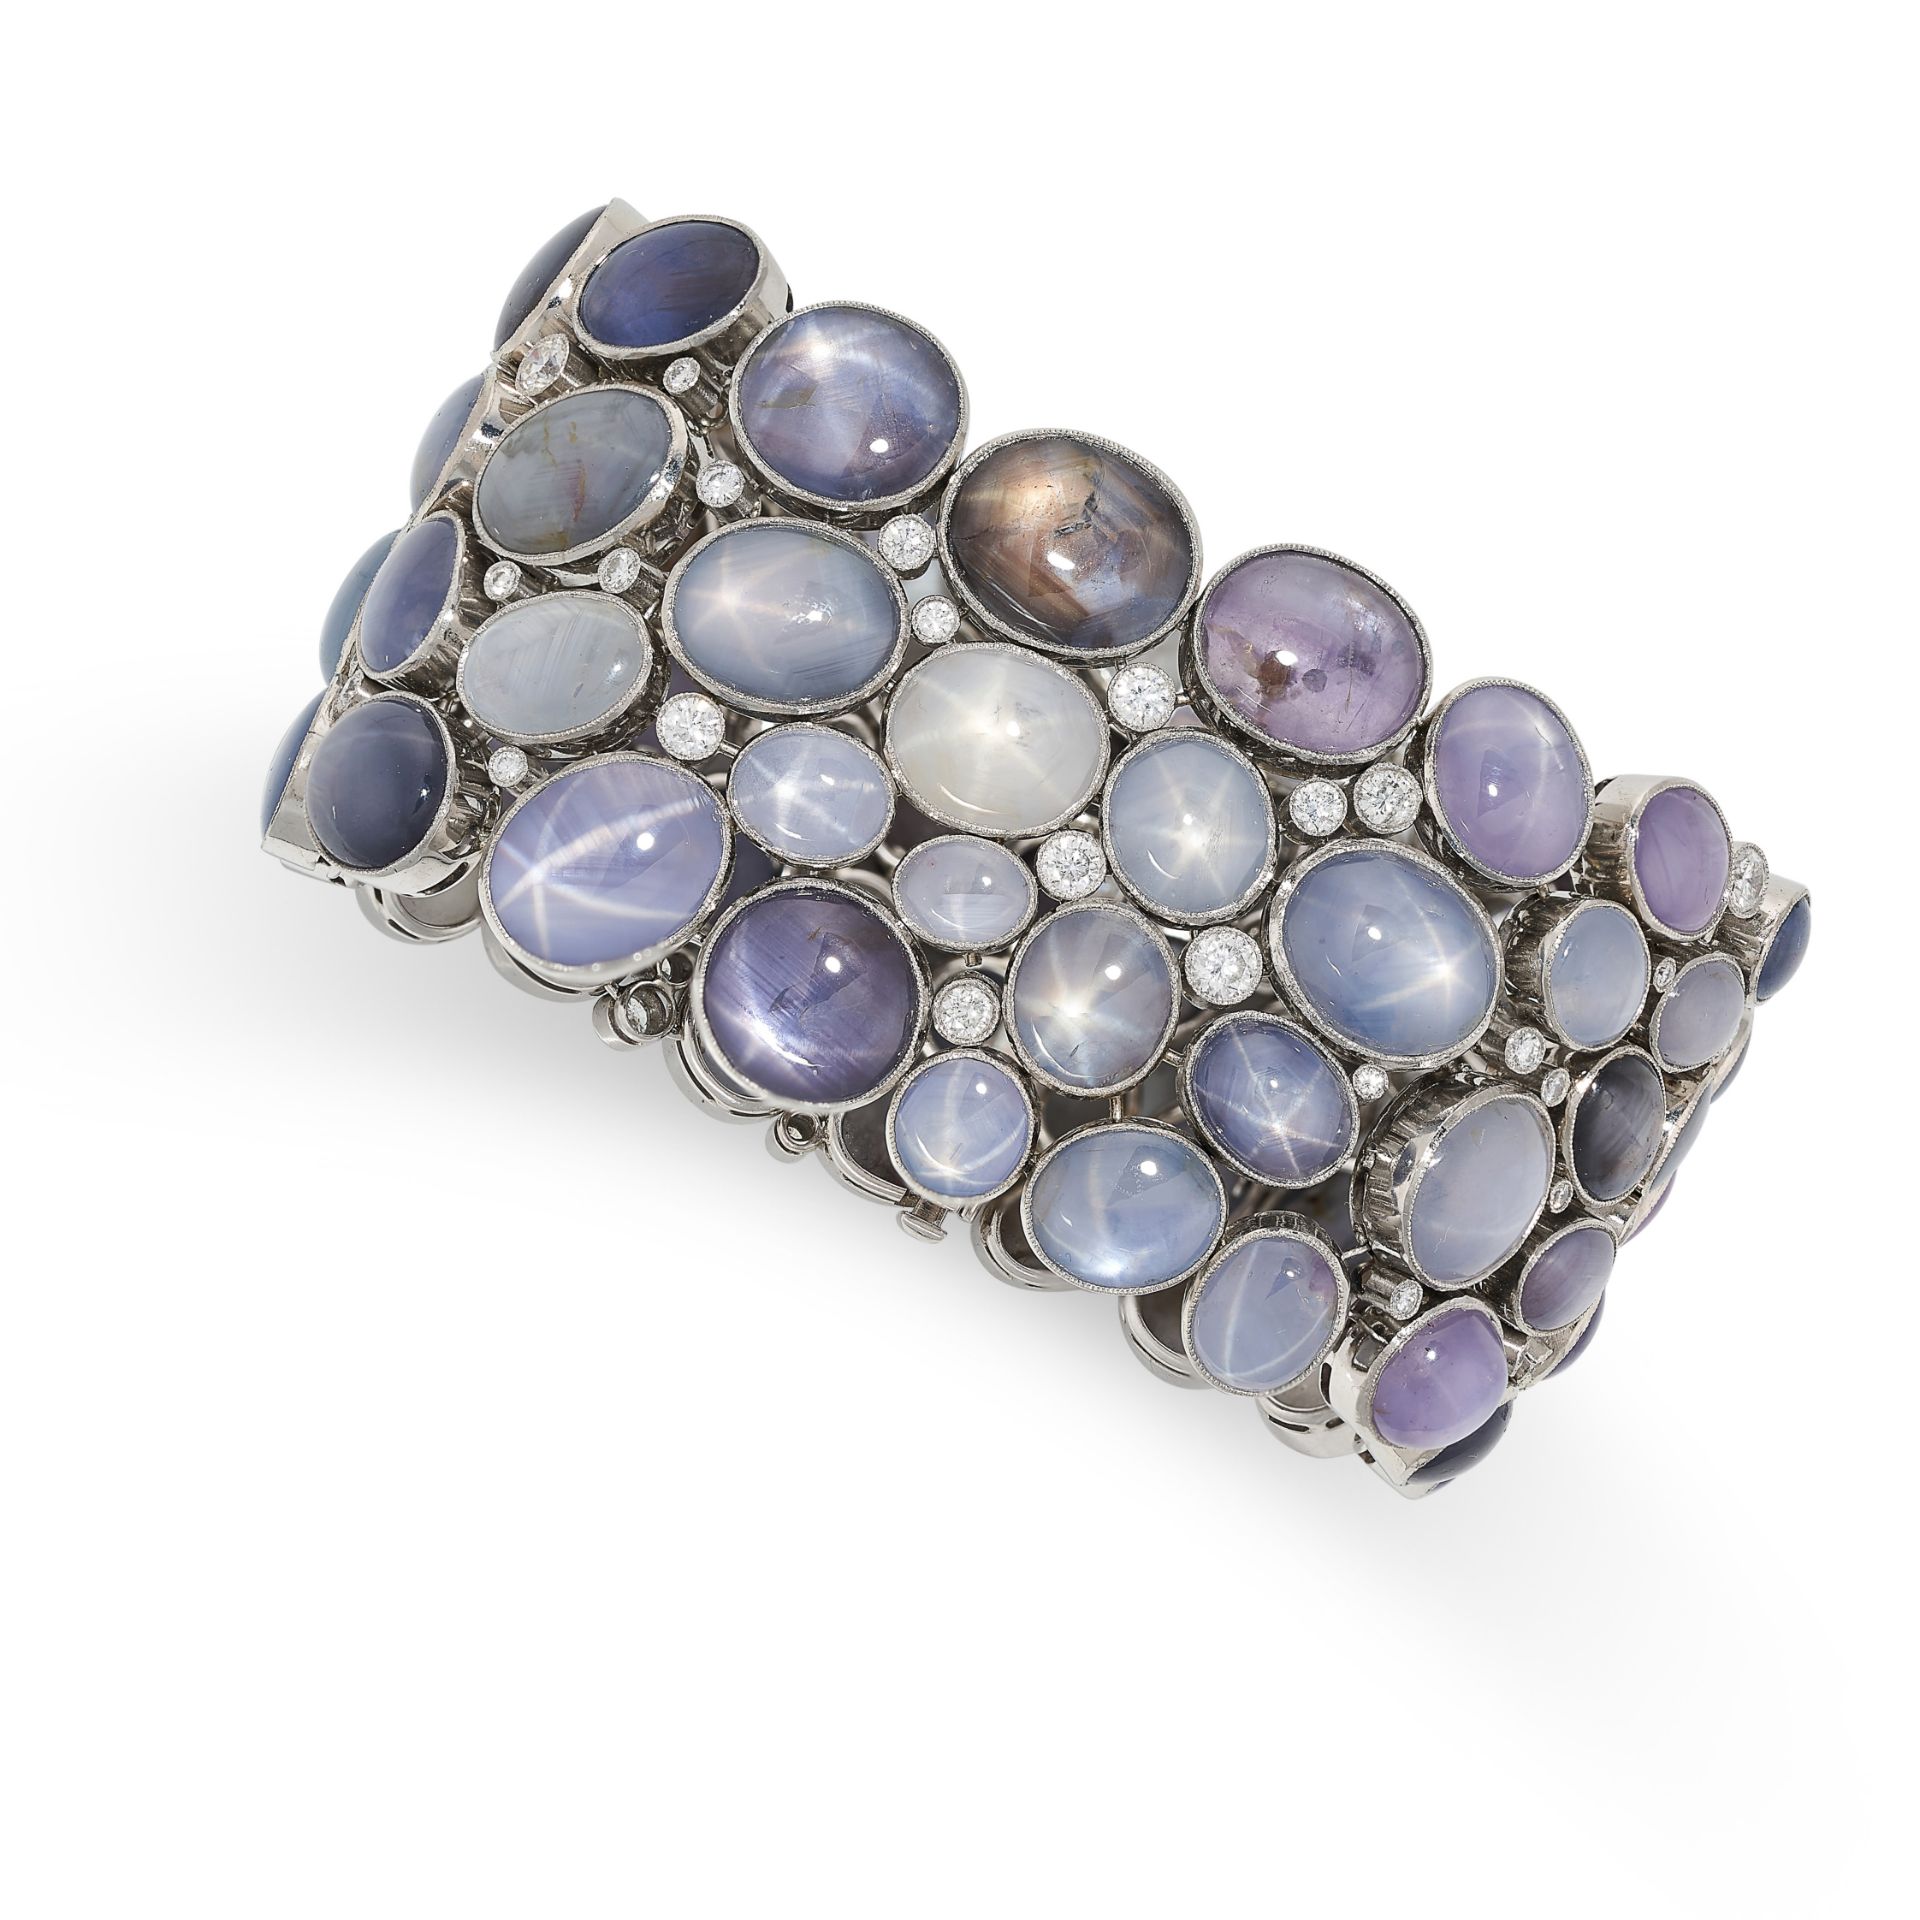 A STAR SAPPHIRE AND DIAMOND BRACELET comprising four rows of various coloured cabochon star